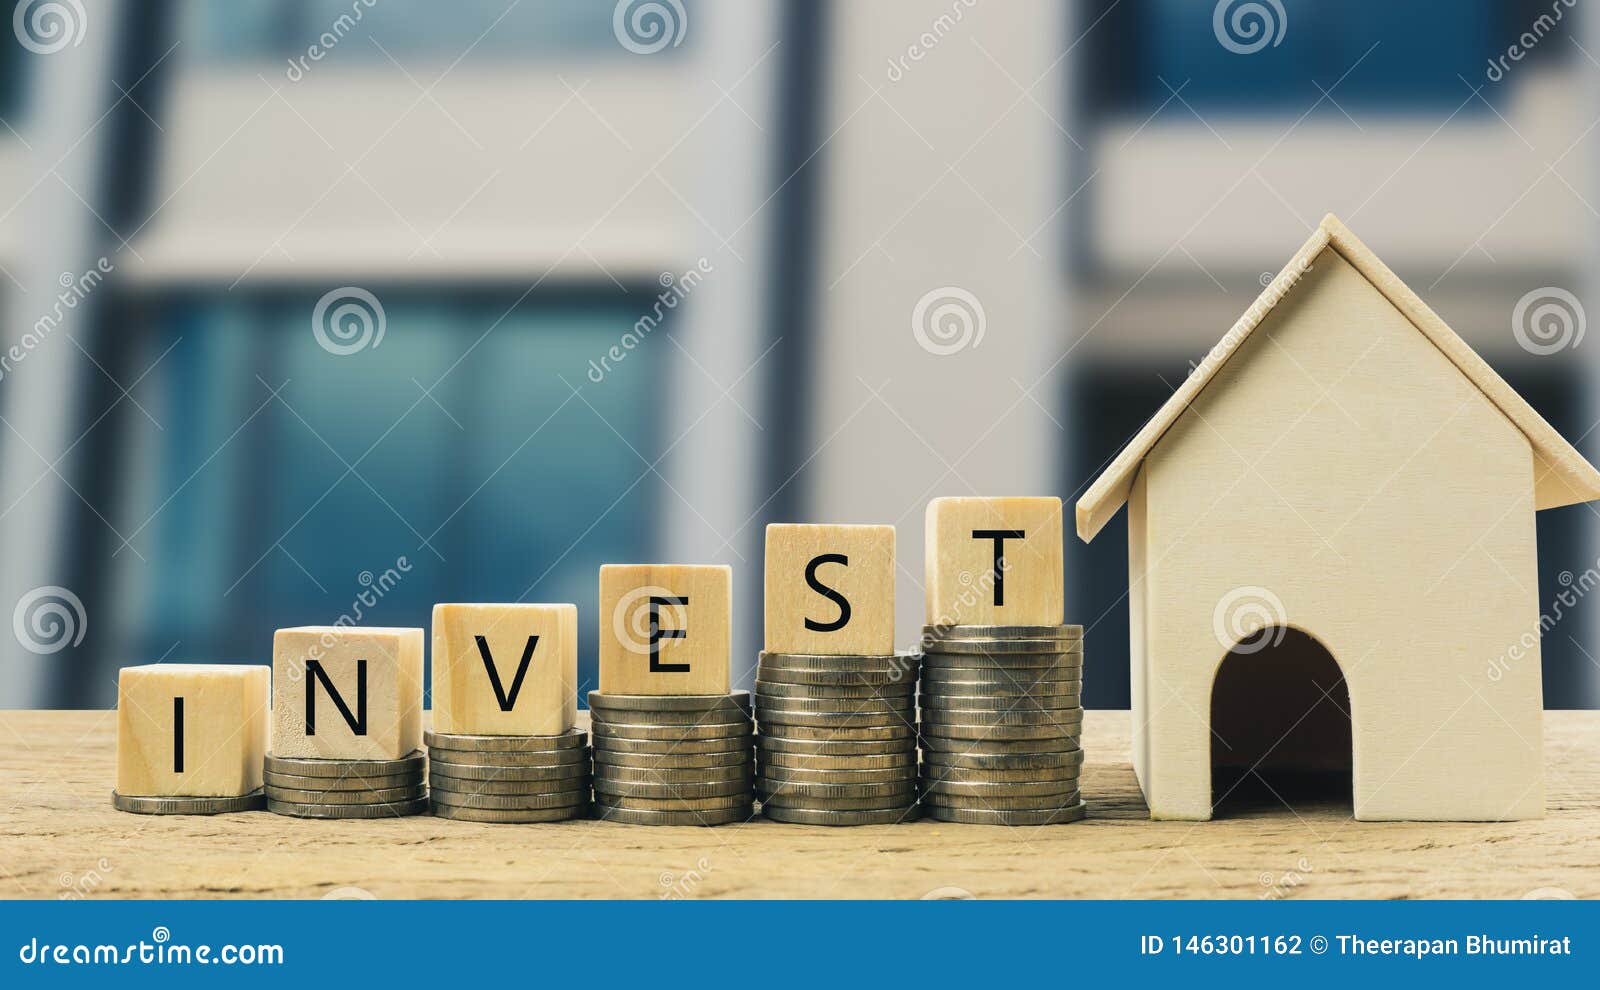 Real Estate Investment, Money Savings For Buy New Home